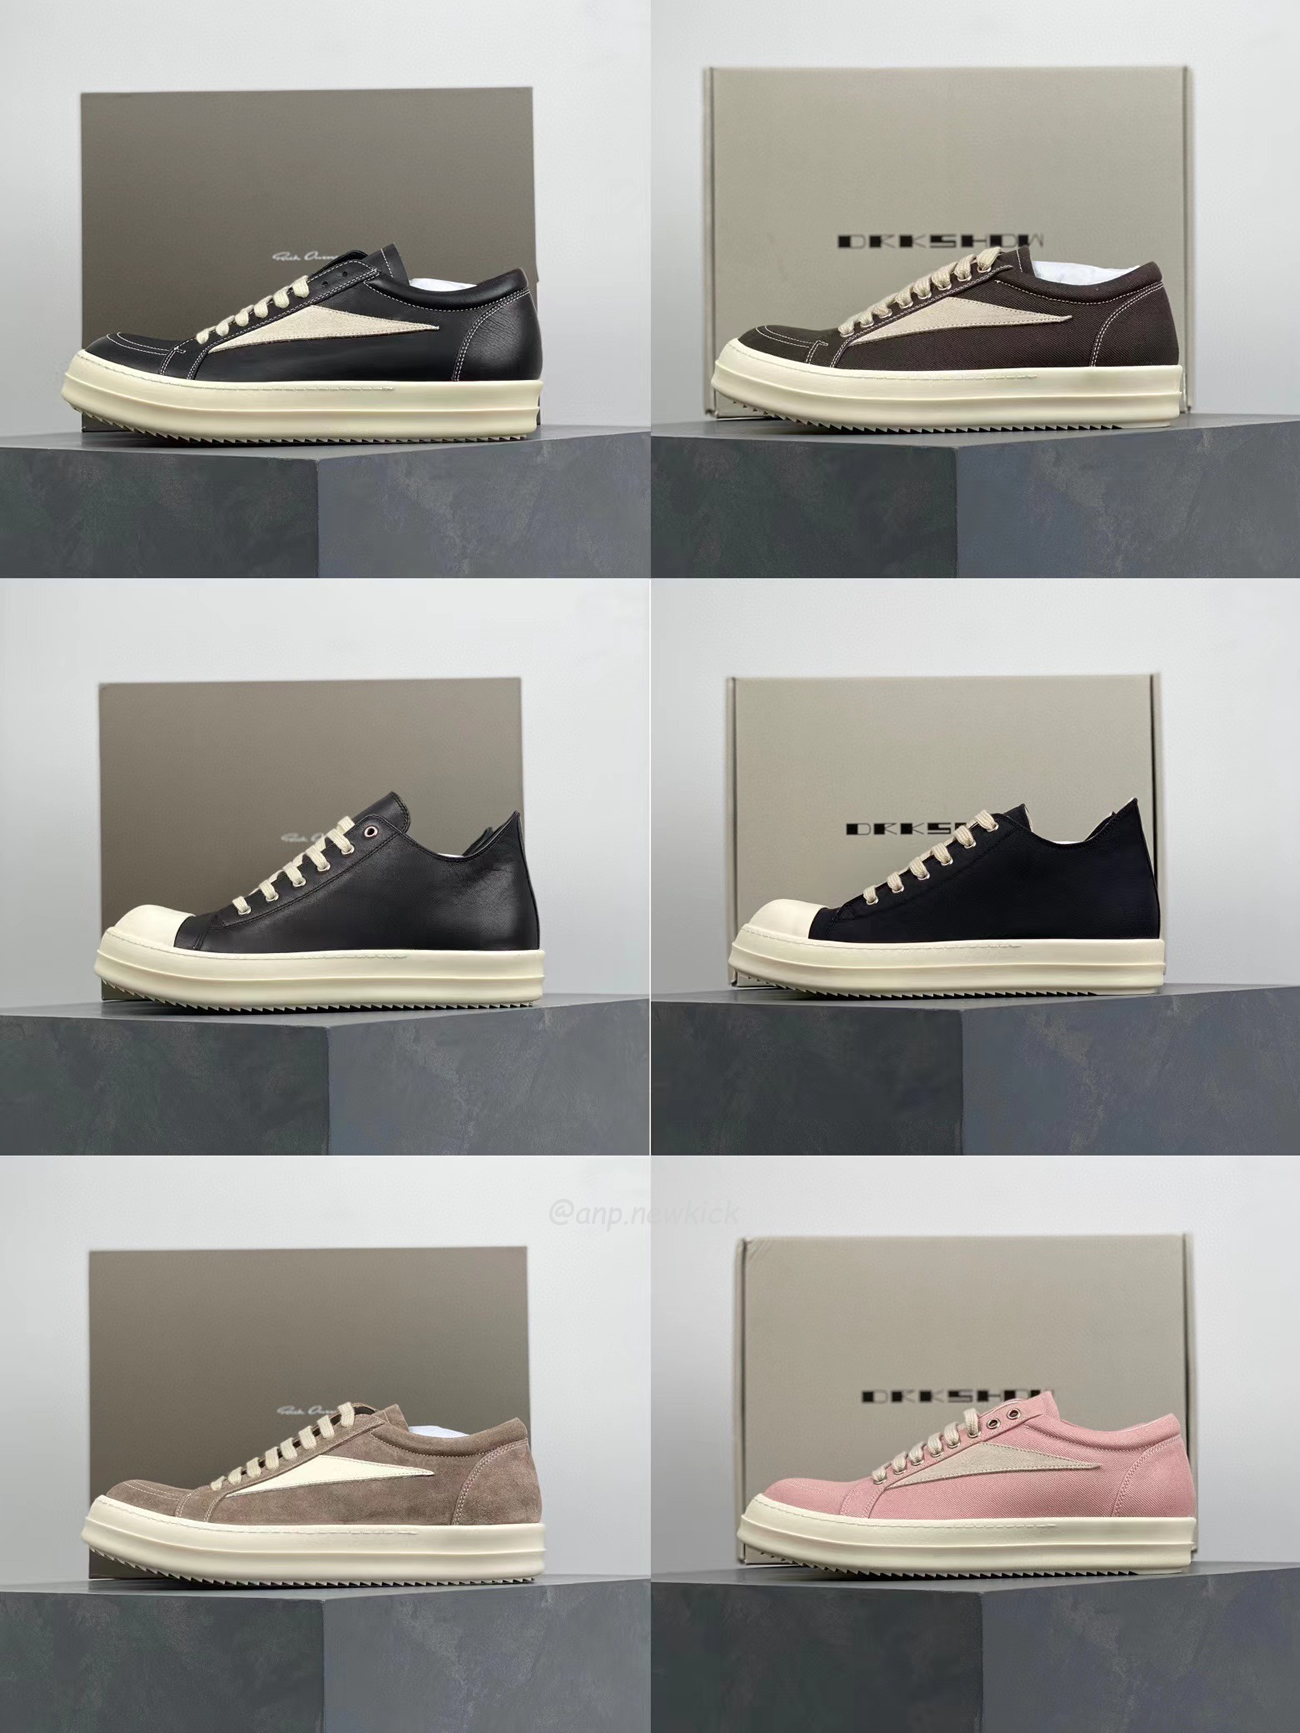 Rick Owens Leather Low Top Vintage Sneakers Suede Canvas Black Taupe Grey Faded Pnk Pearl Milk Dark Dust (18) - newkick.org